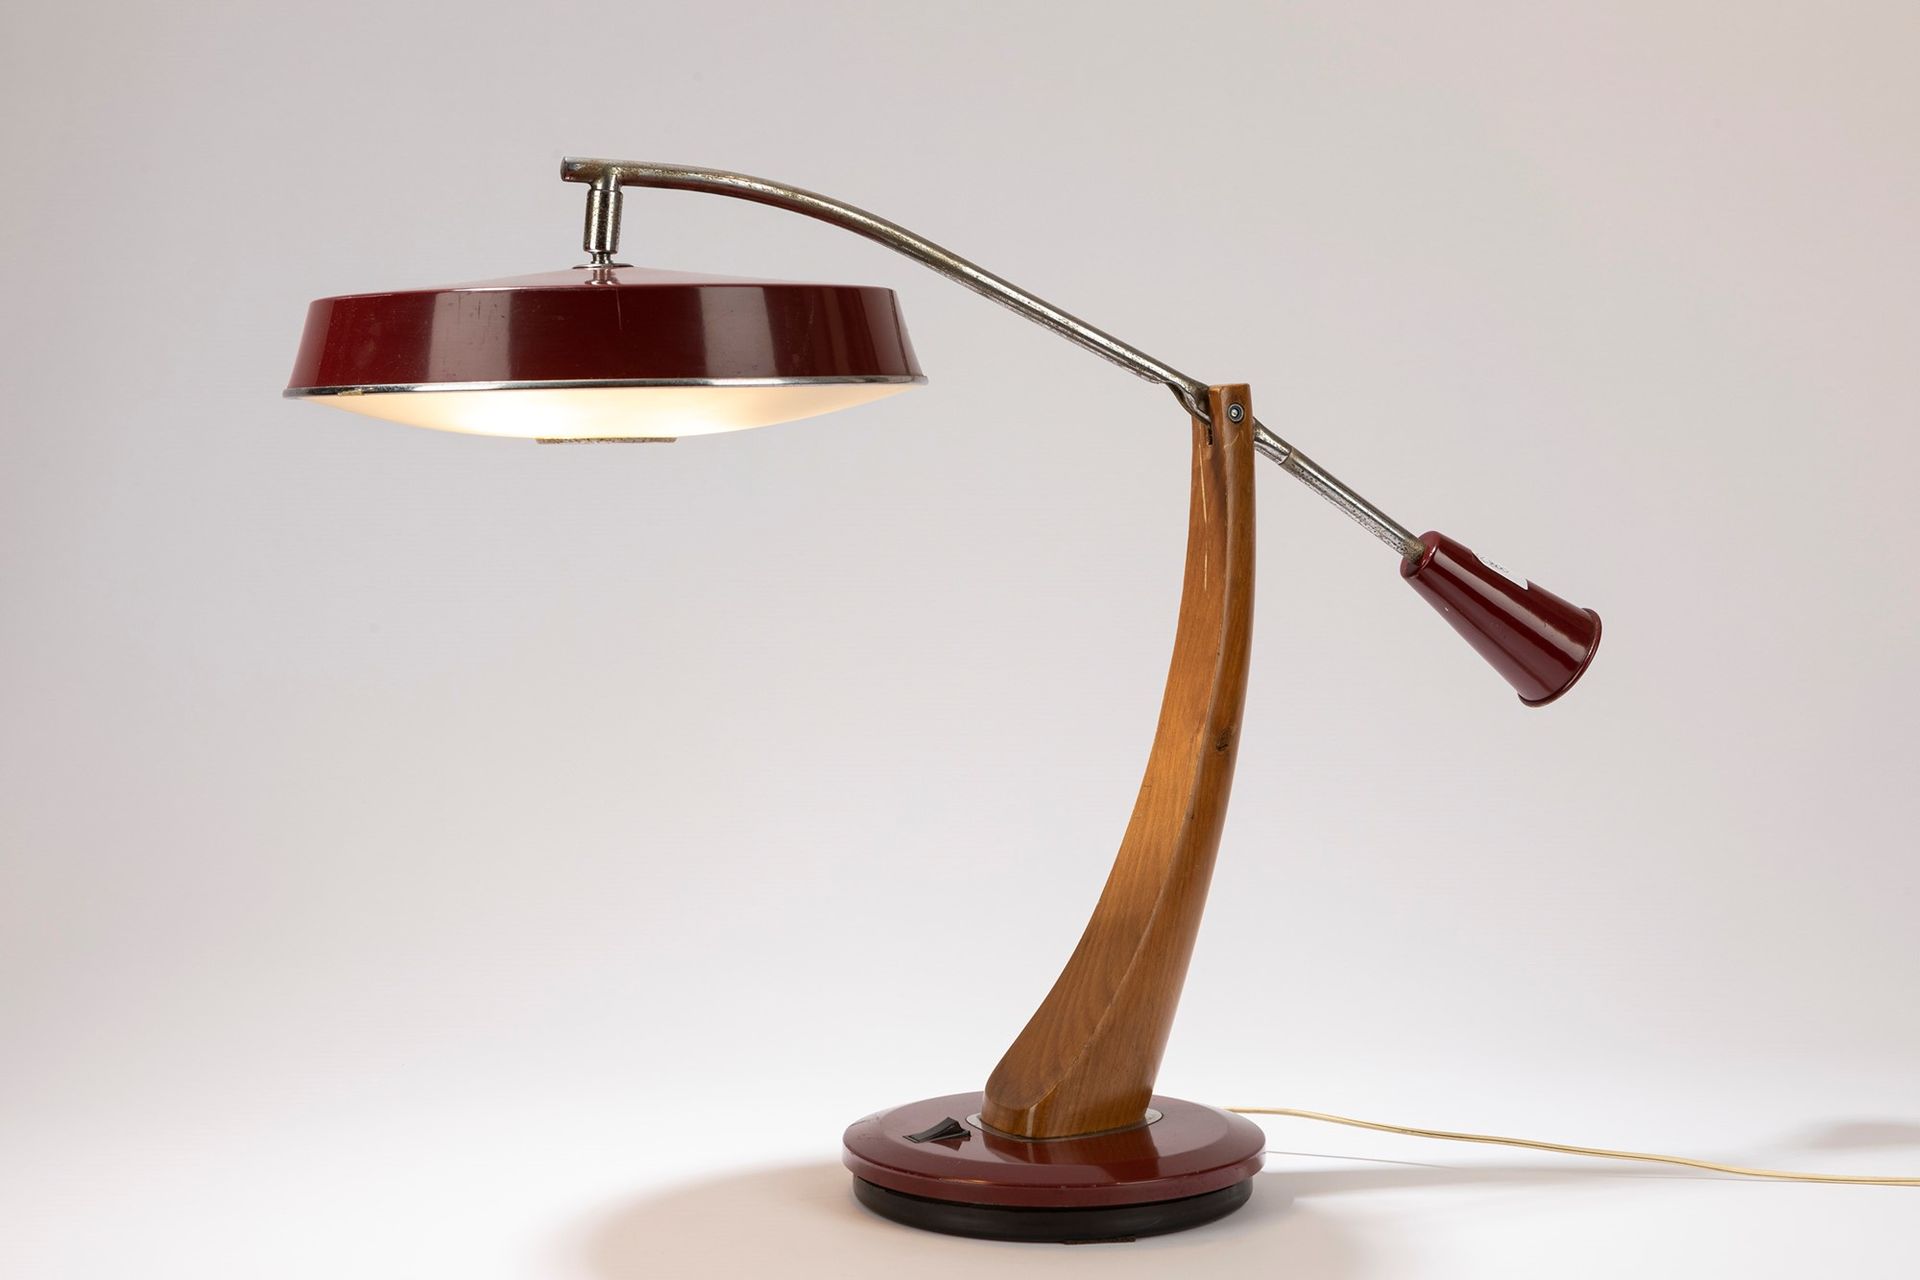 ITALIAN MANUFACTURE Table lamp, 50's period

cm h 50 x 30
with base and diffuser&hellip;